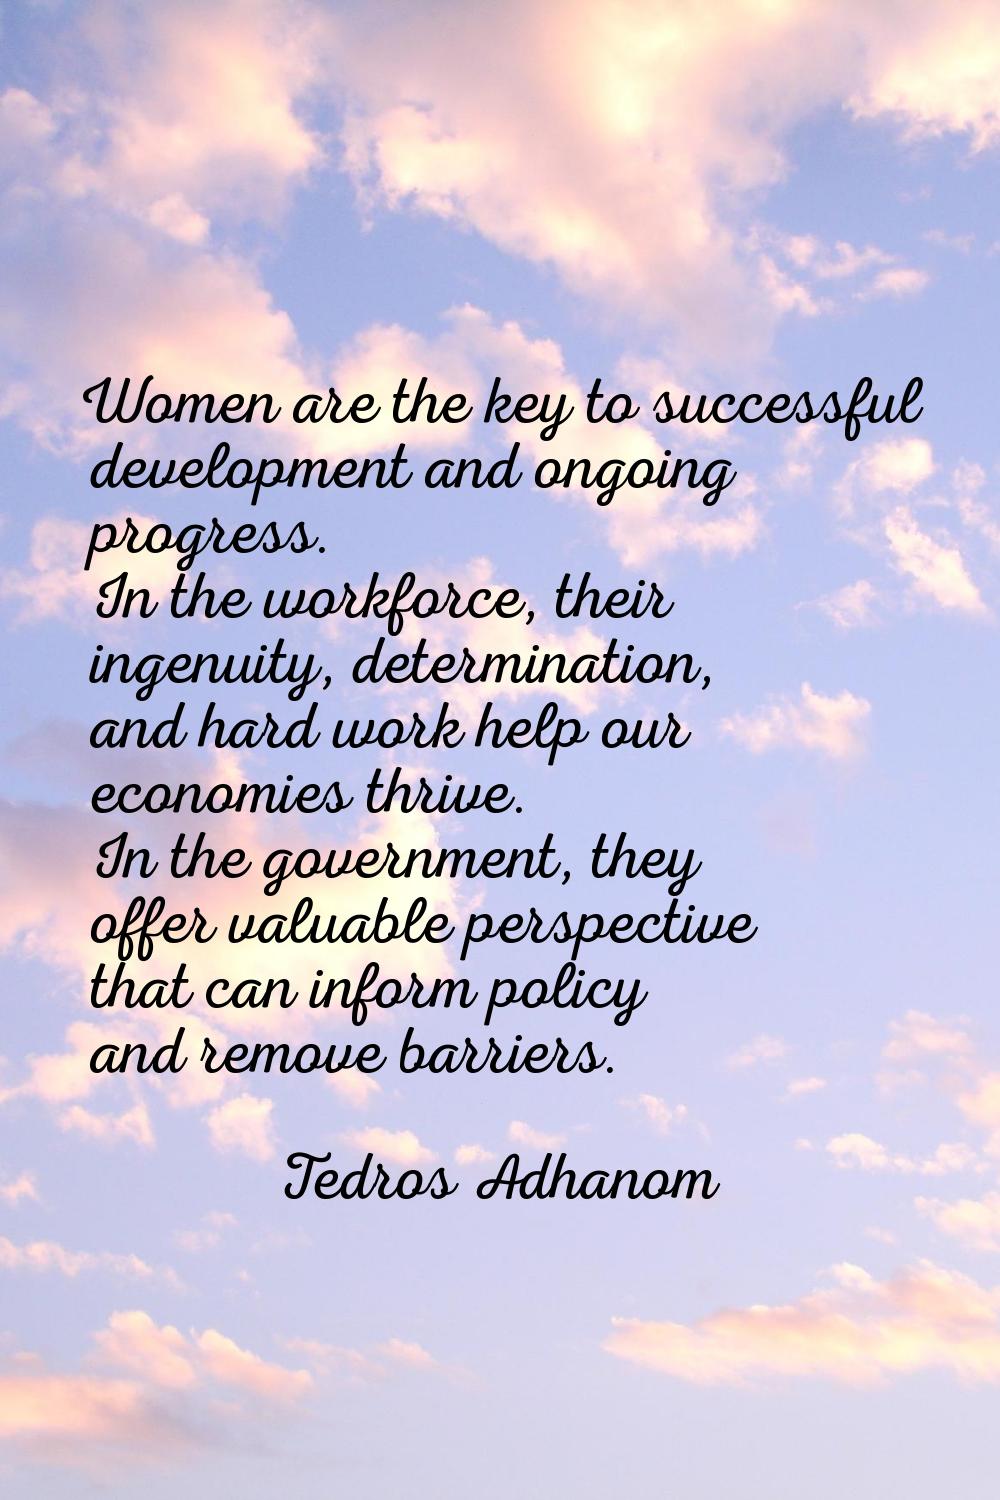 Women are the key to successful development and ongoing progress. In the workforce, their ingenuity